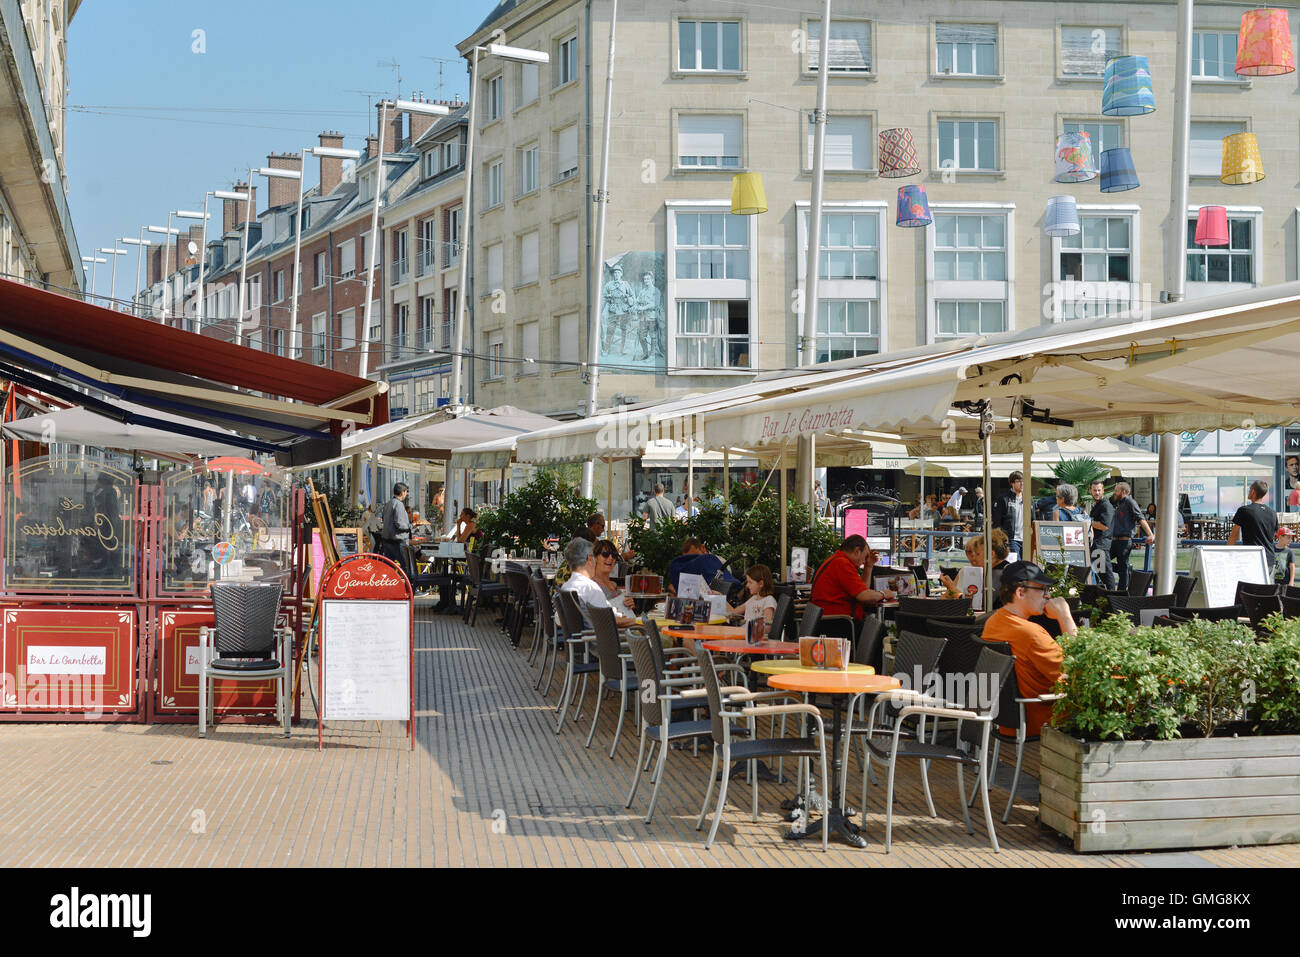 Alfresco cafes in the street, Amiens, France Stock Photo